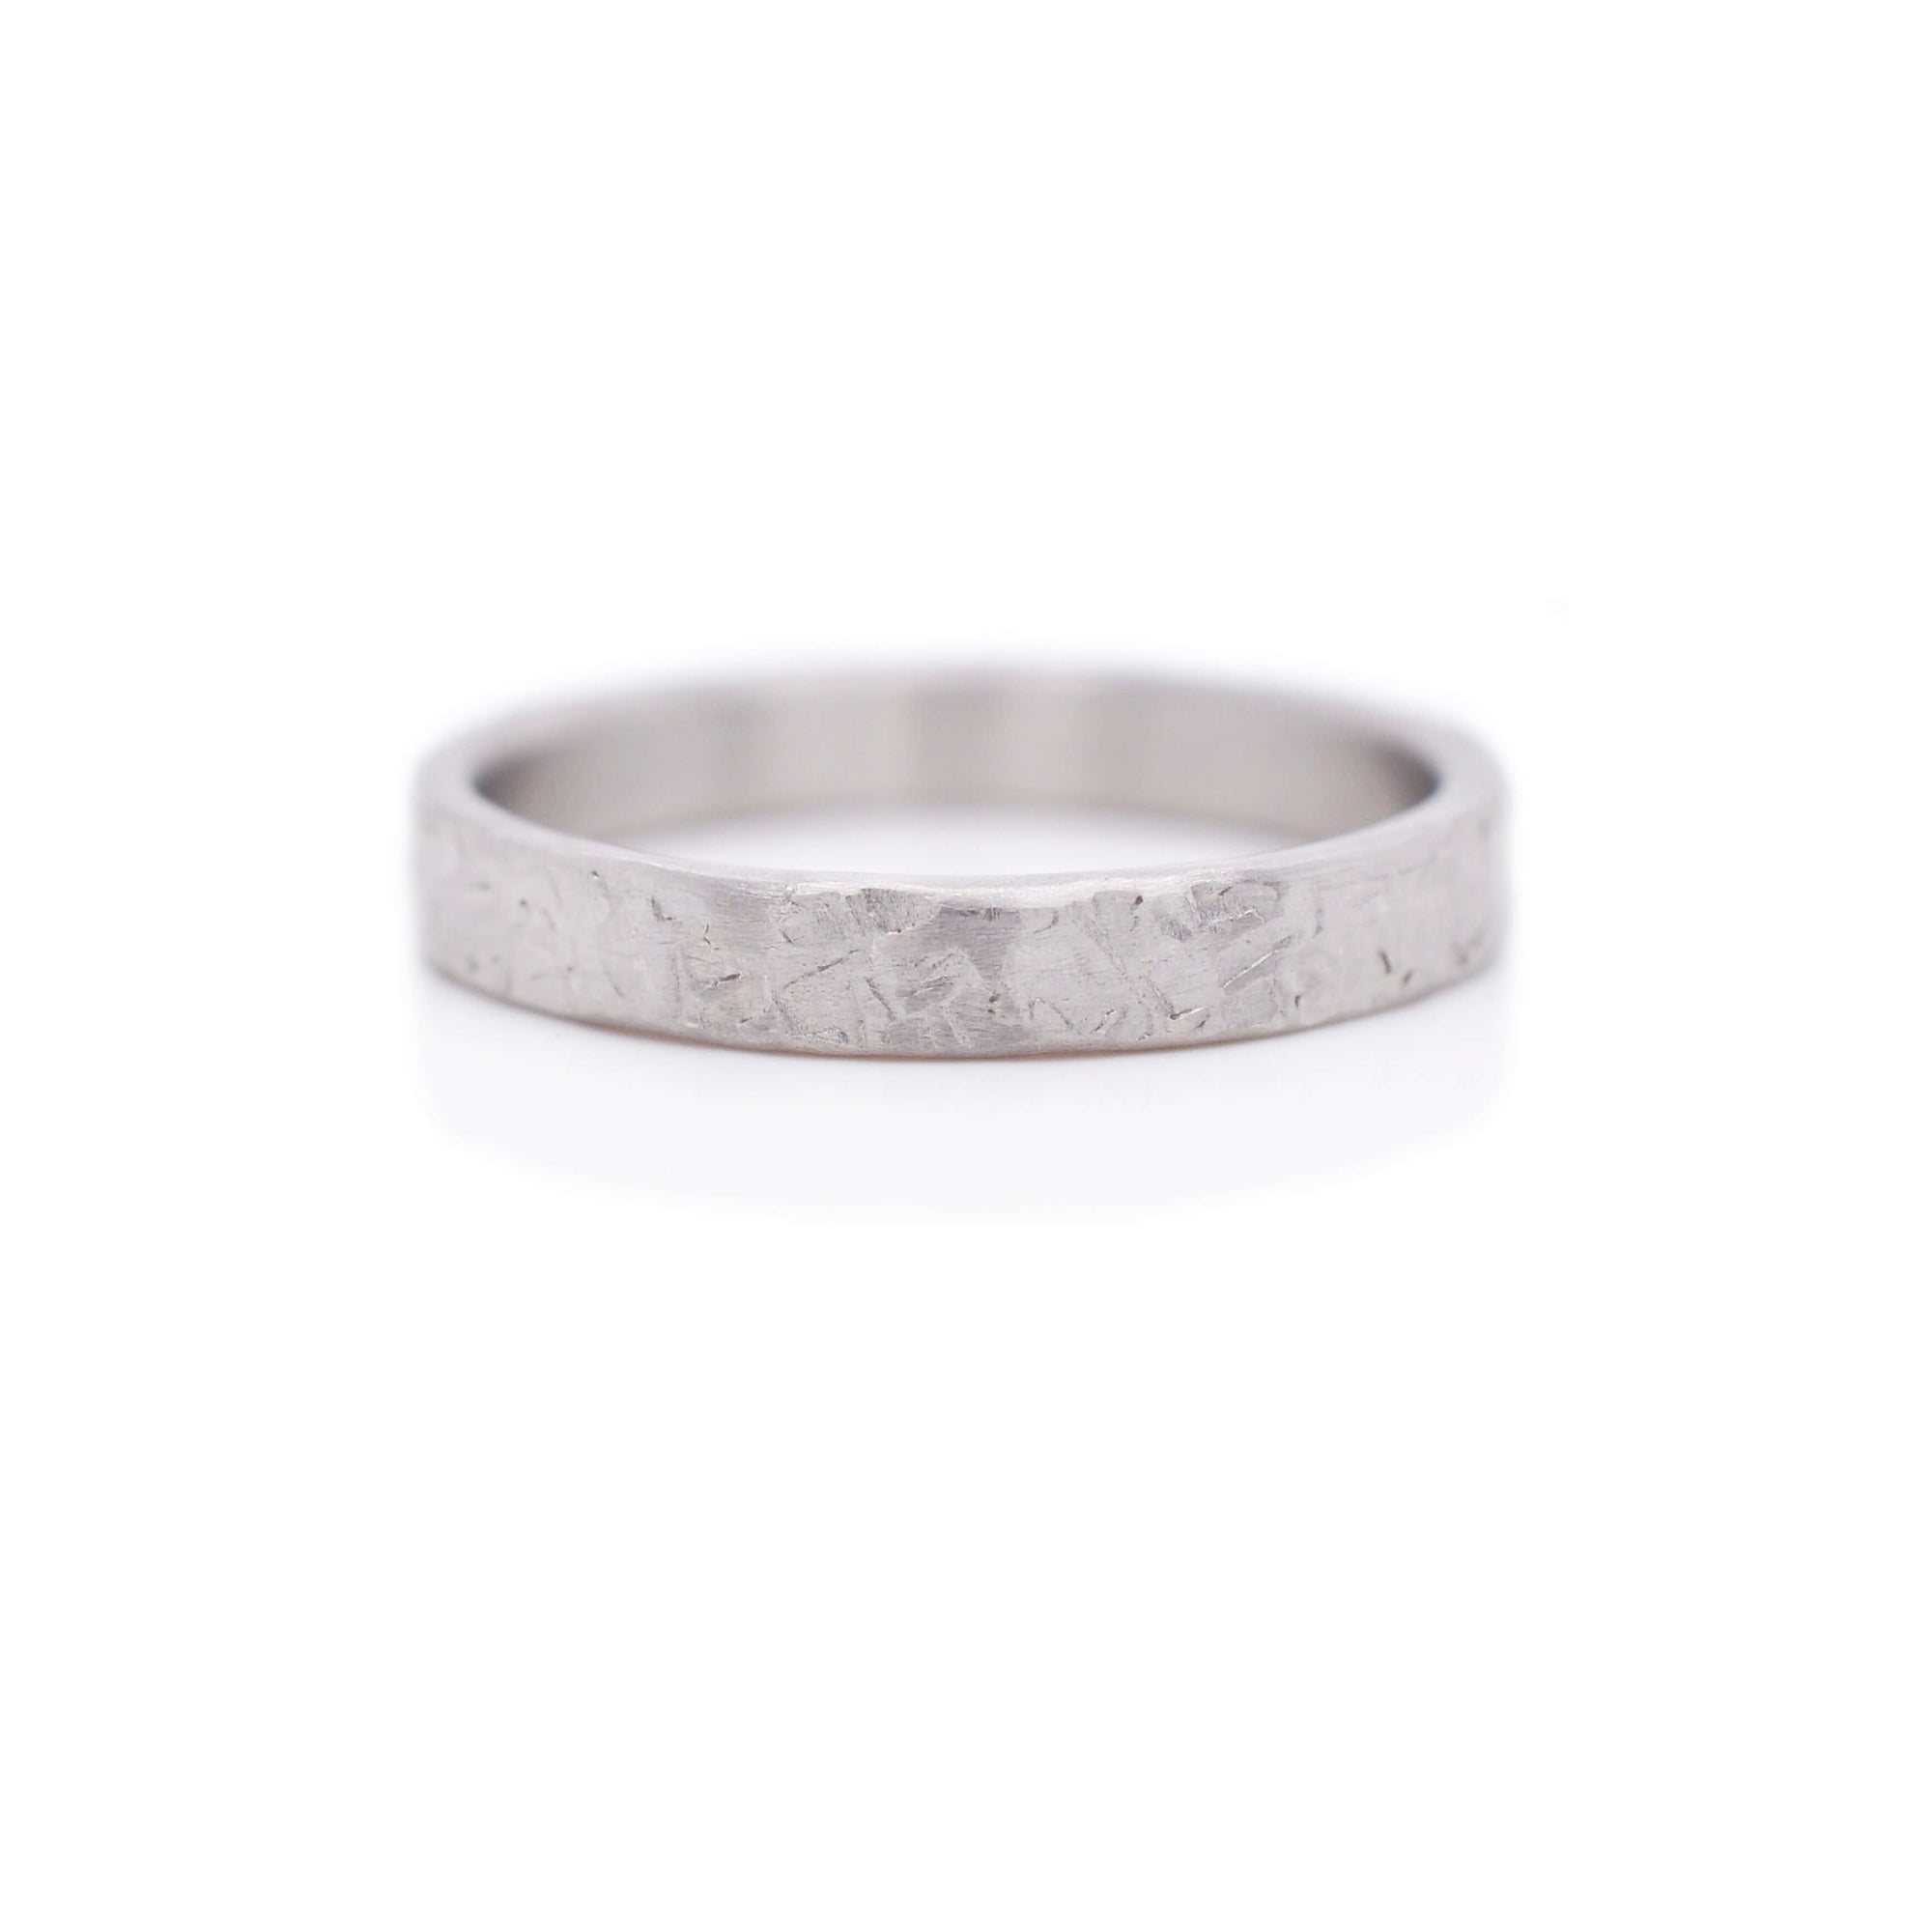 Hammered platinum wedding band. Handmade with recycled metal. EC Design Jewelry, Minneapolis, MN.